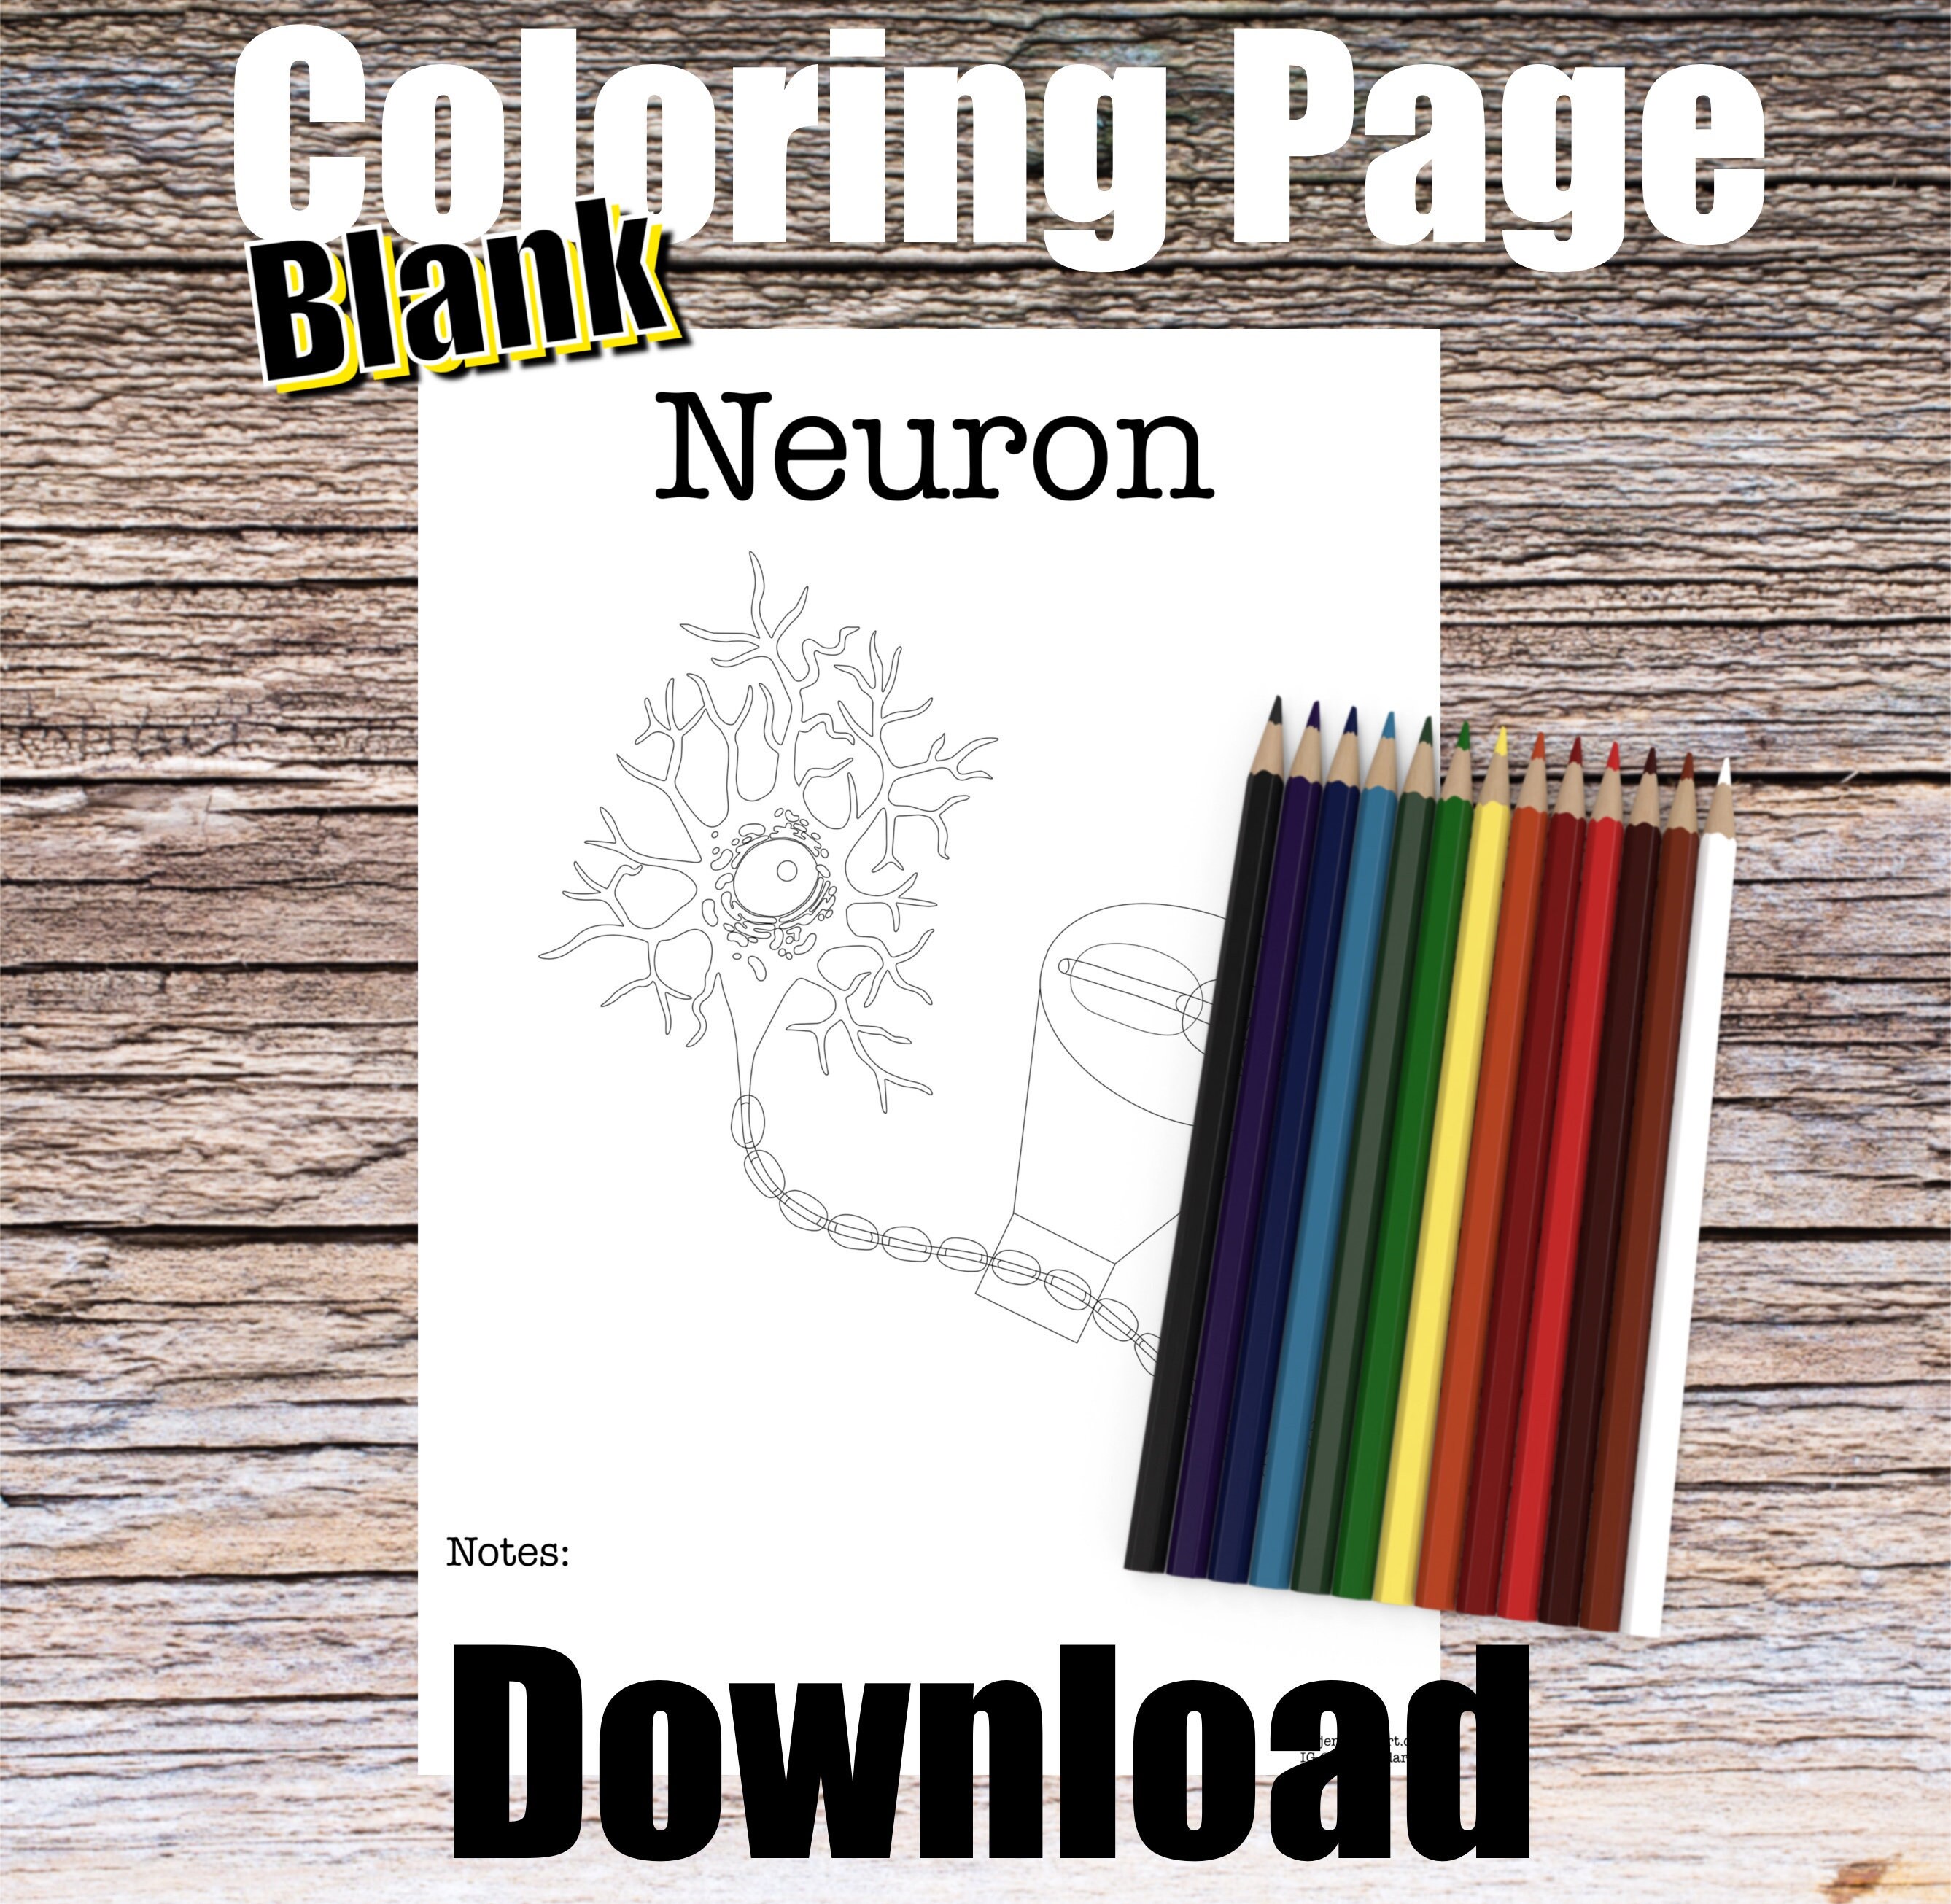 Neuron anatomy coloring page